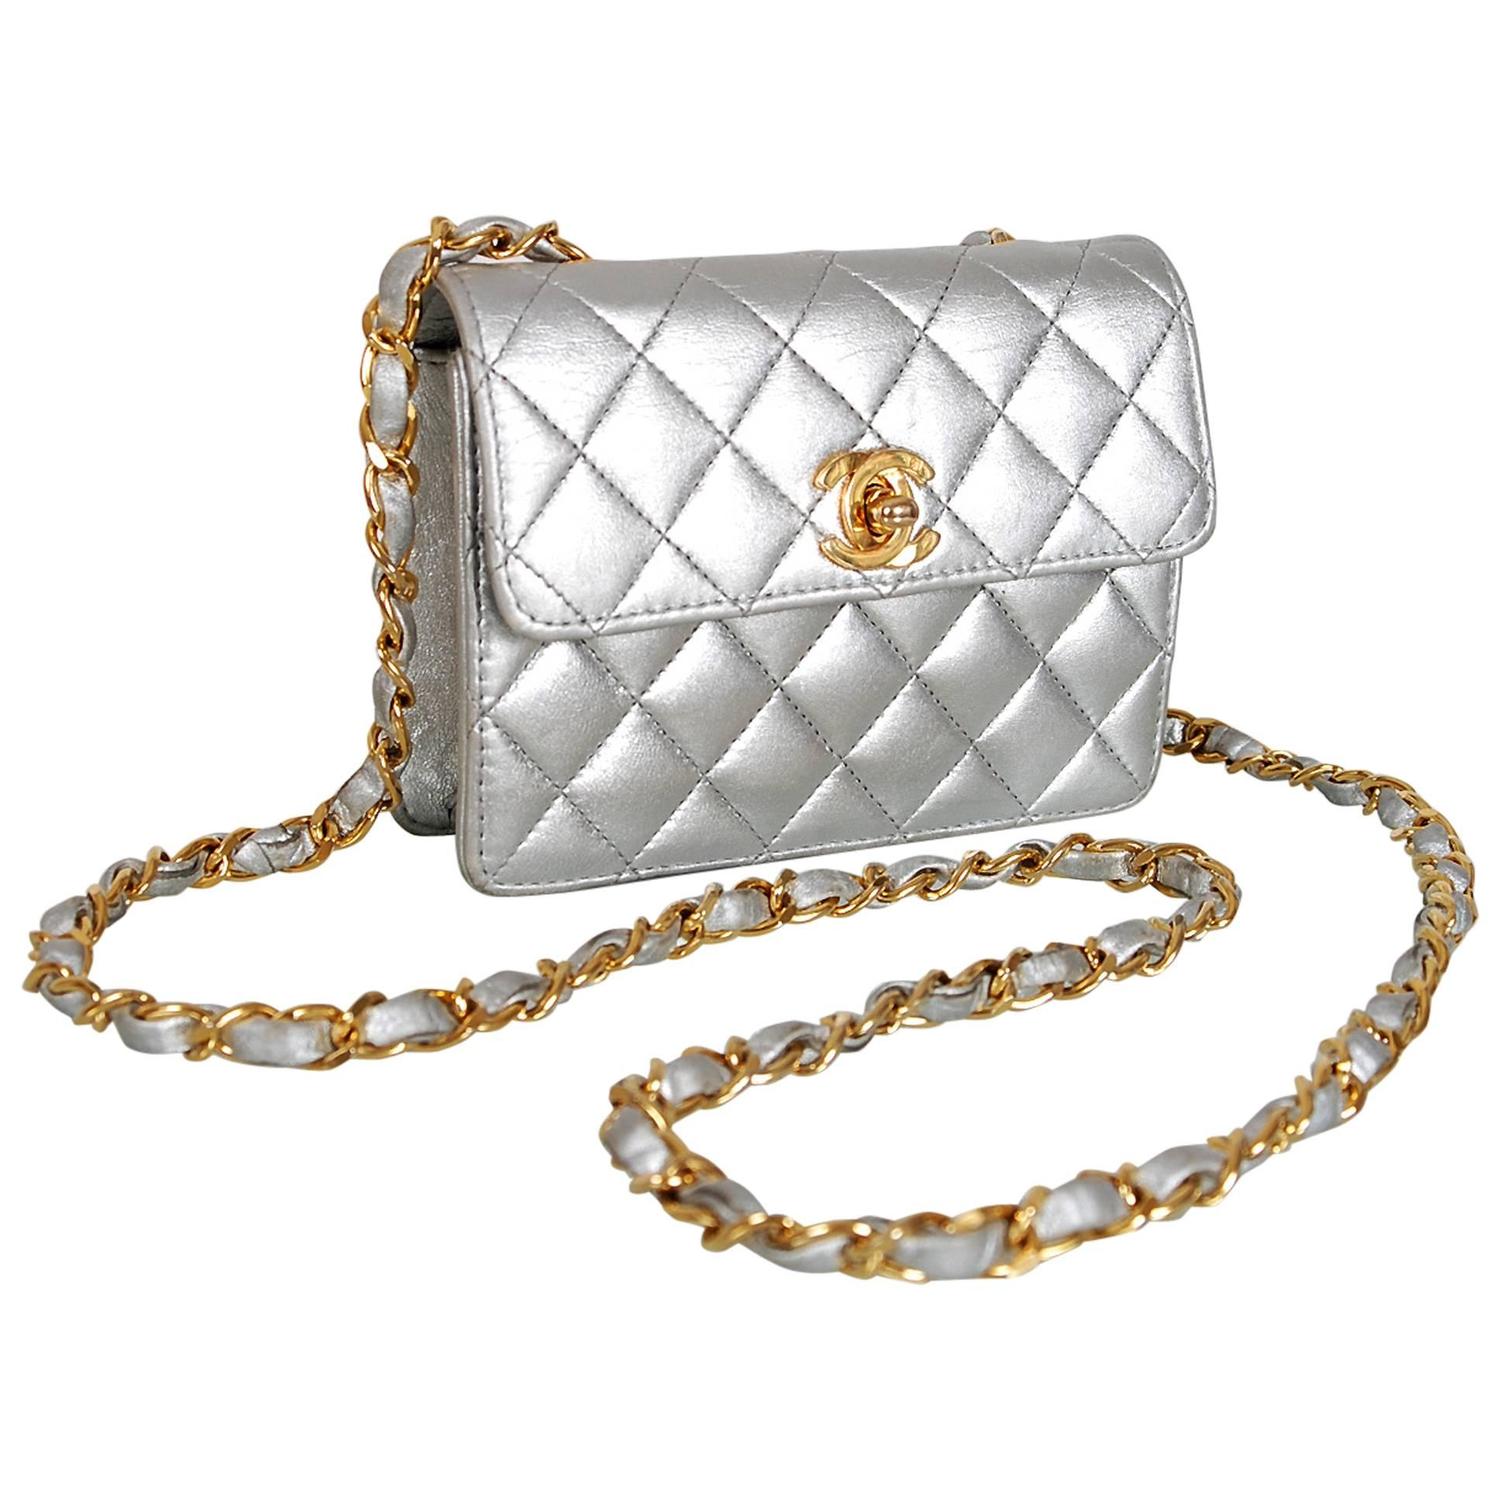 1990's Chanel Metallic-Silver Quilted Leather Mini Flap Shoulder Bag ...